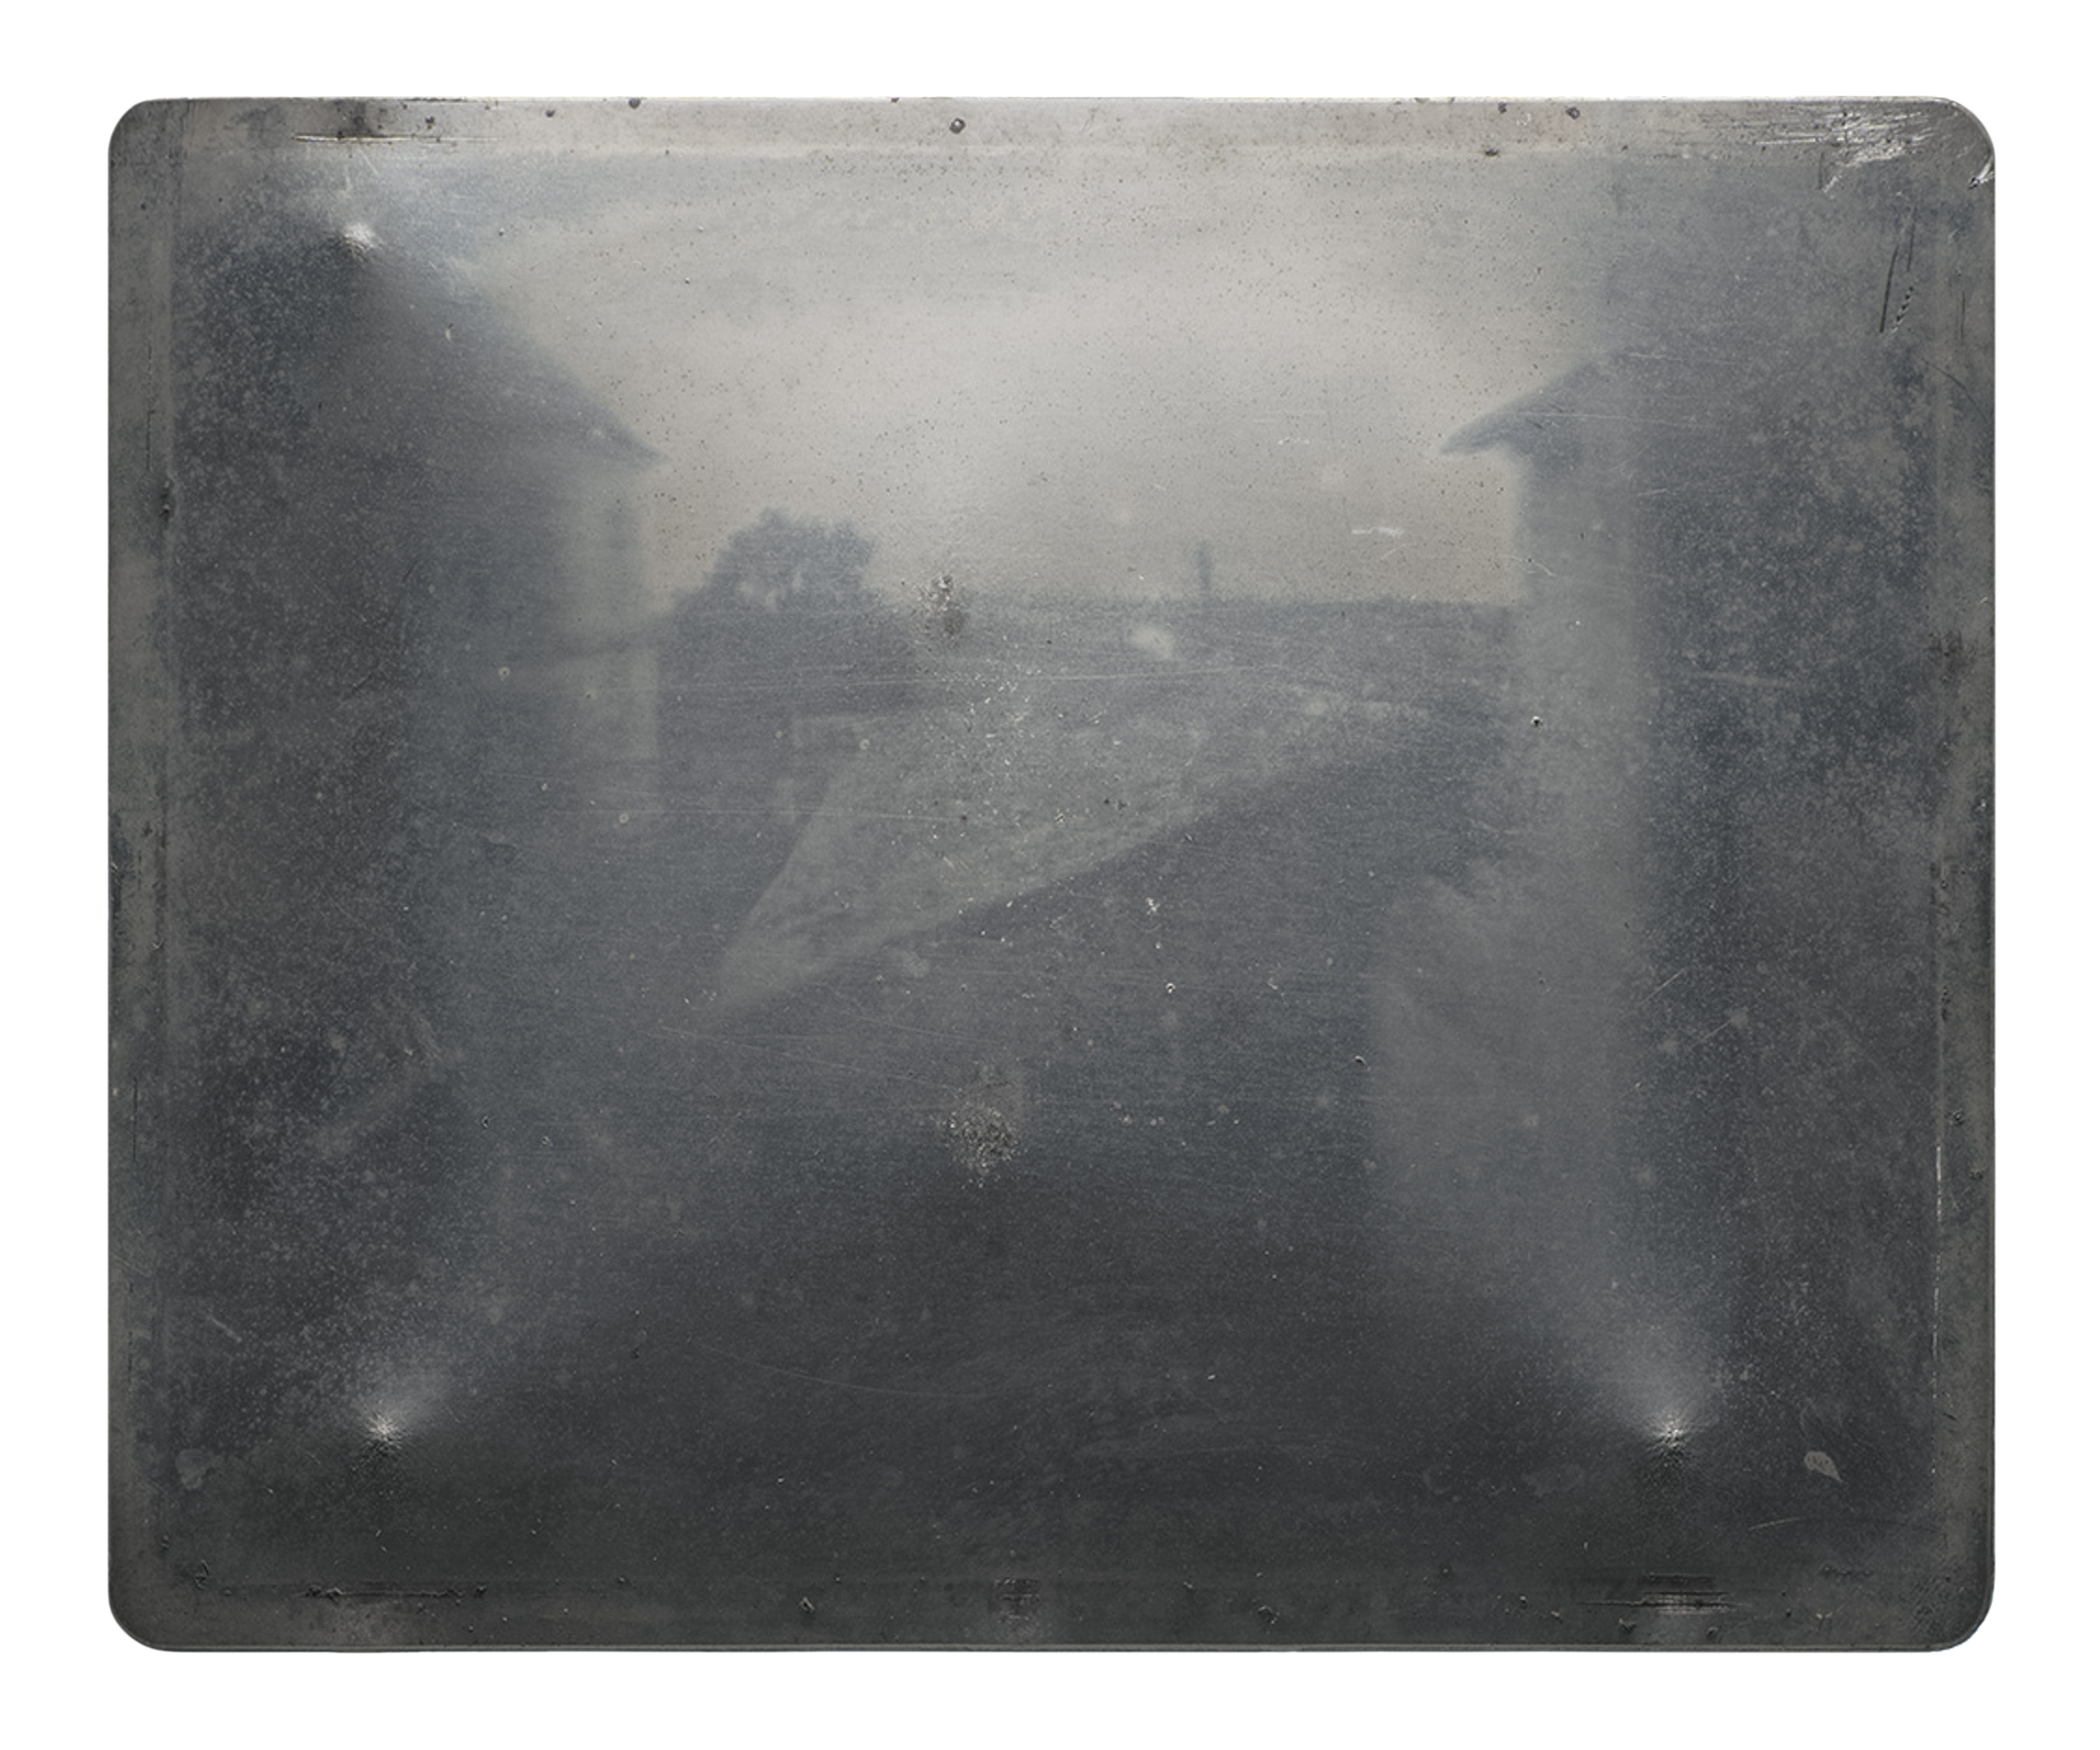 View from the Window at Le Gras showing some buildings and a tree in the distance. This image has been flipped from the original metal plate along both the horizontal and vertical axes. The camera obscura would have originally recorded the upper right corner in the lower left corner. Public Domain.